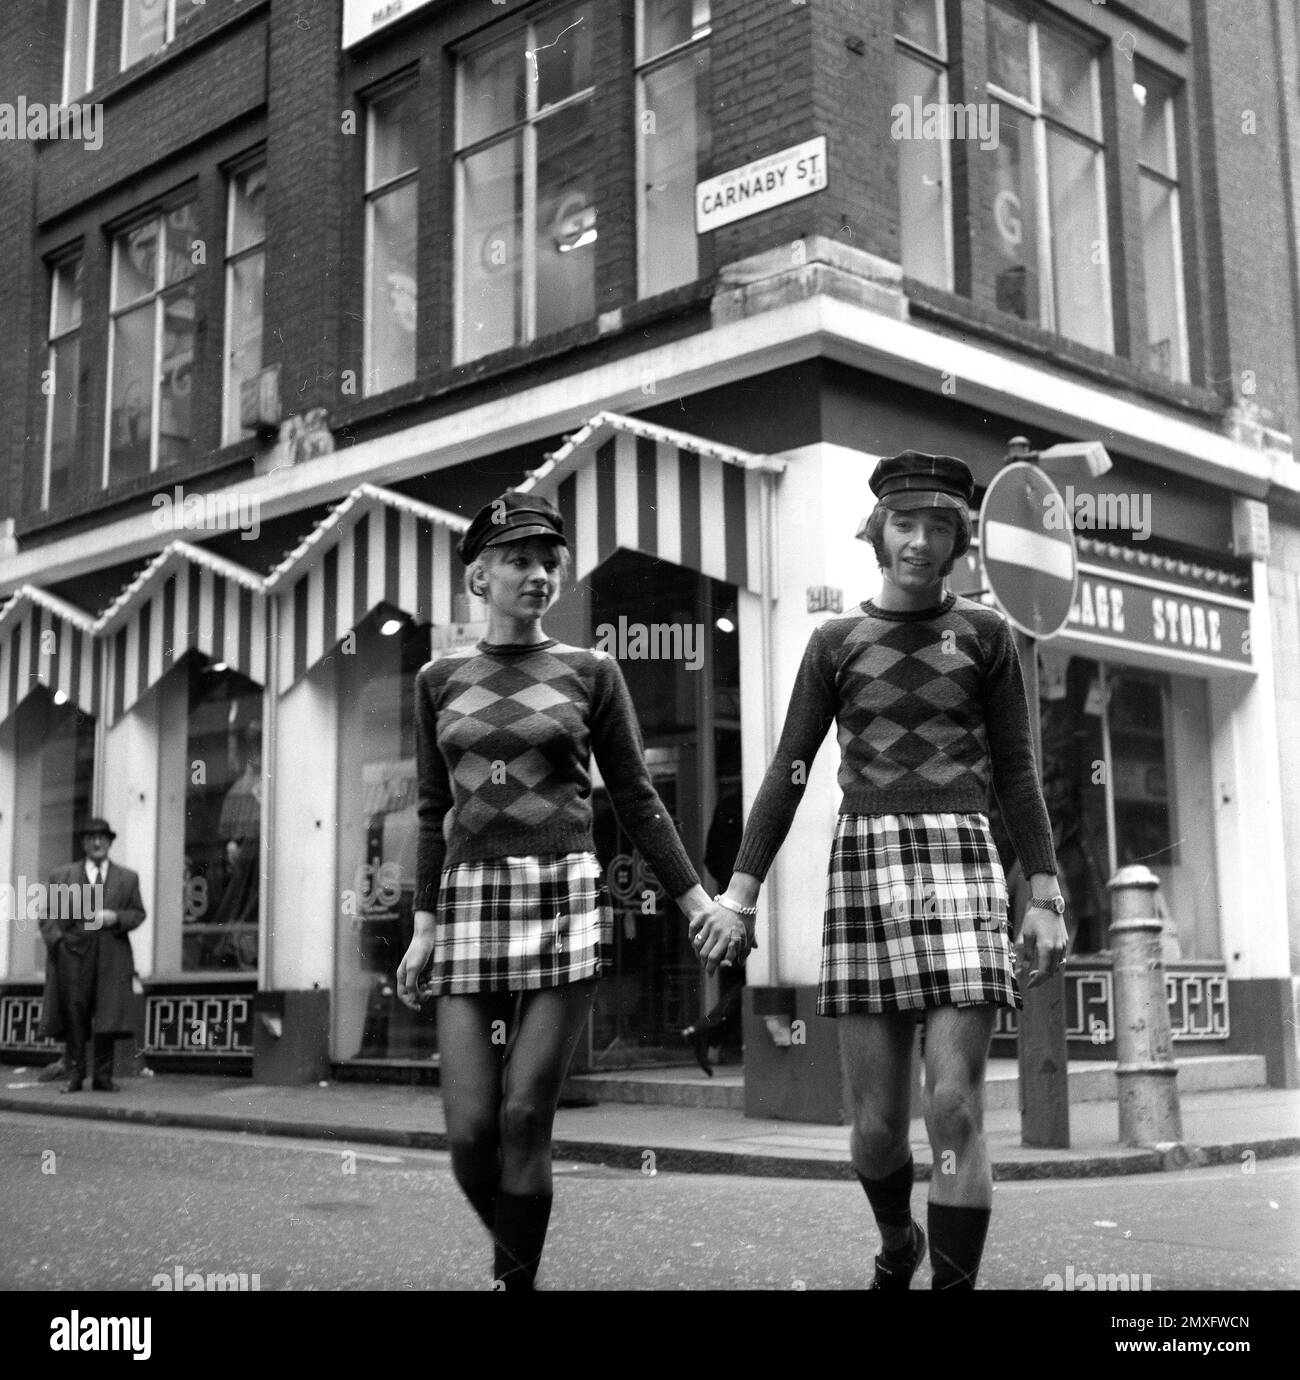 His and hers fashion in Carnaby Street, London 1968 Stock Photo